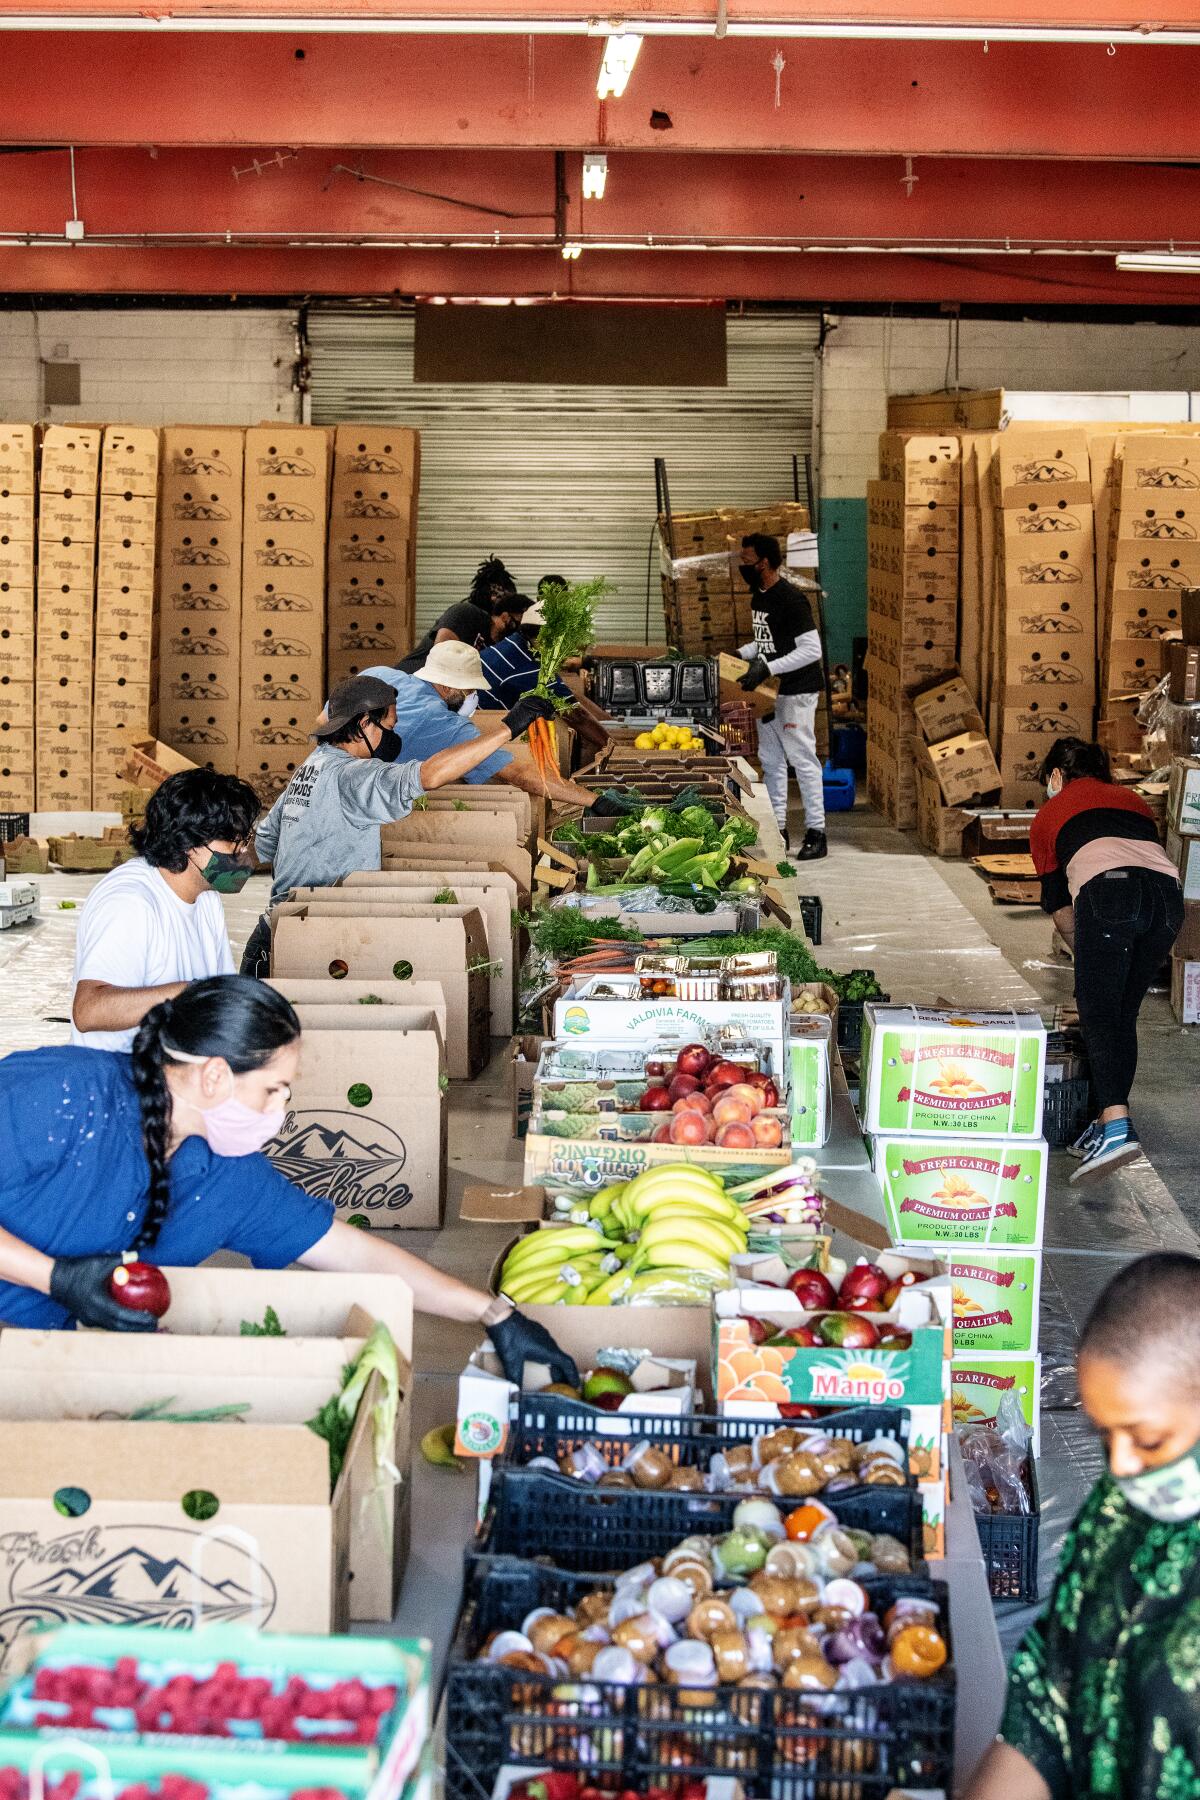 Numerous volunteers help to pack produce boxes at Summaeverythang headquarters in South L.A.